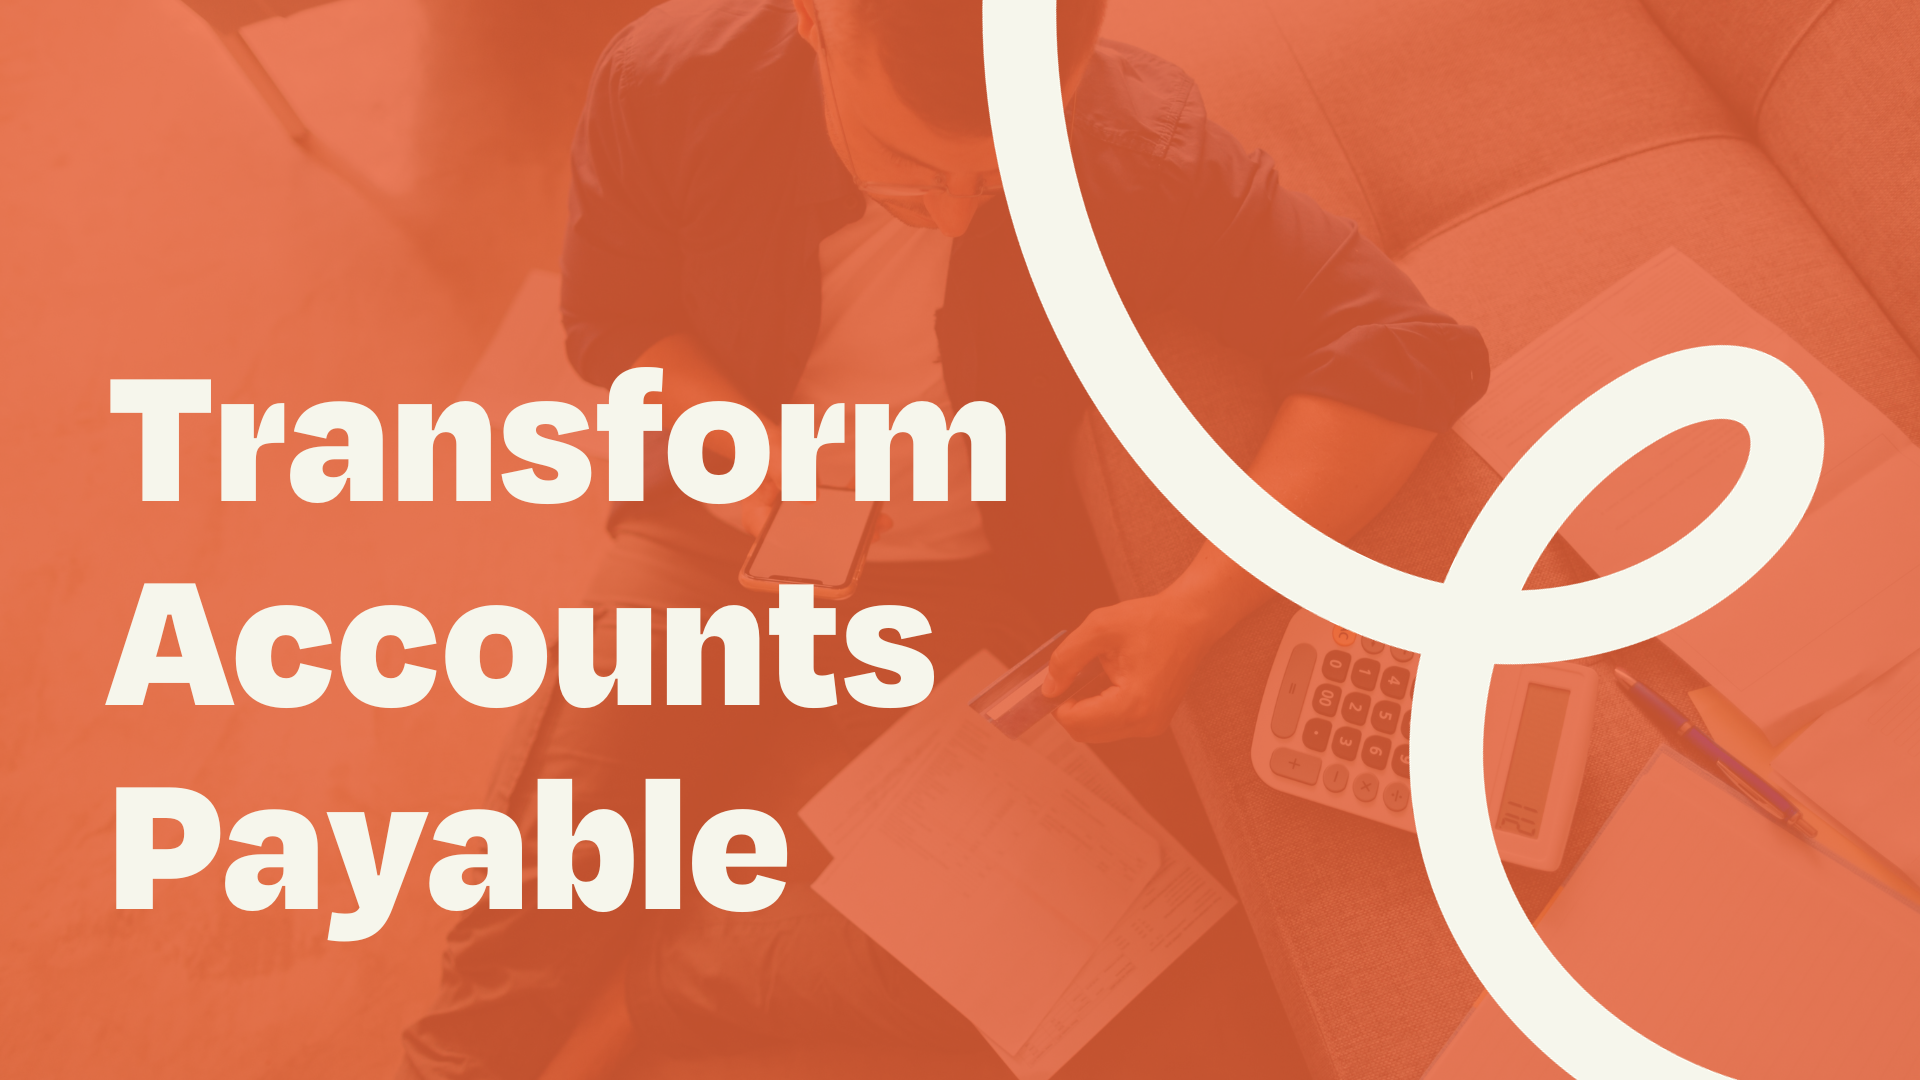 Transform Your Accounts Payable Process With Automated Efficiency | Accounting Prose